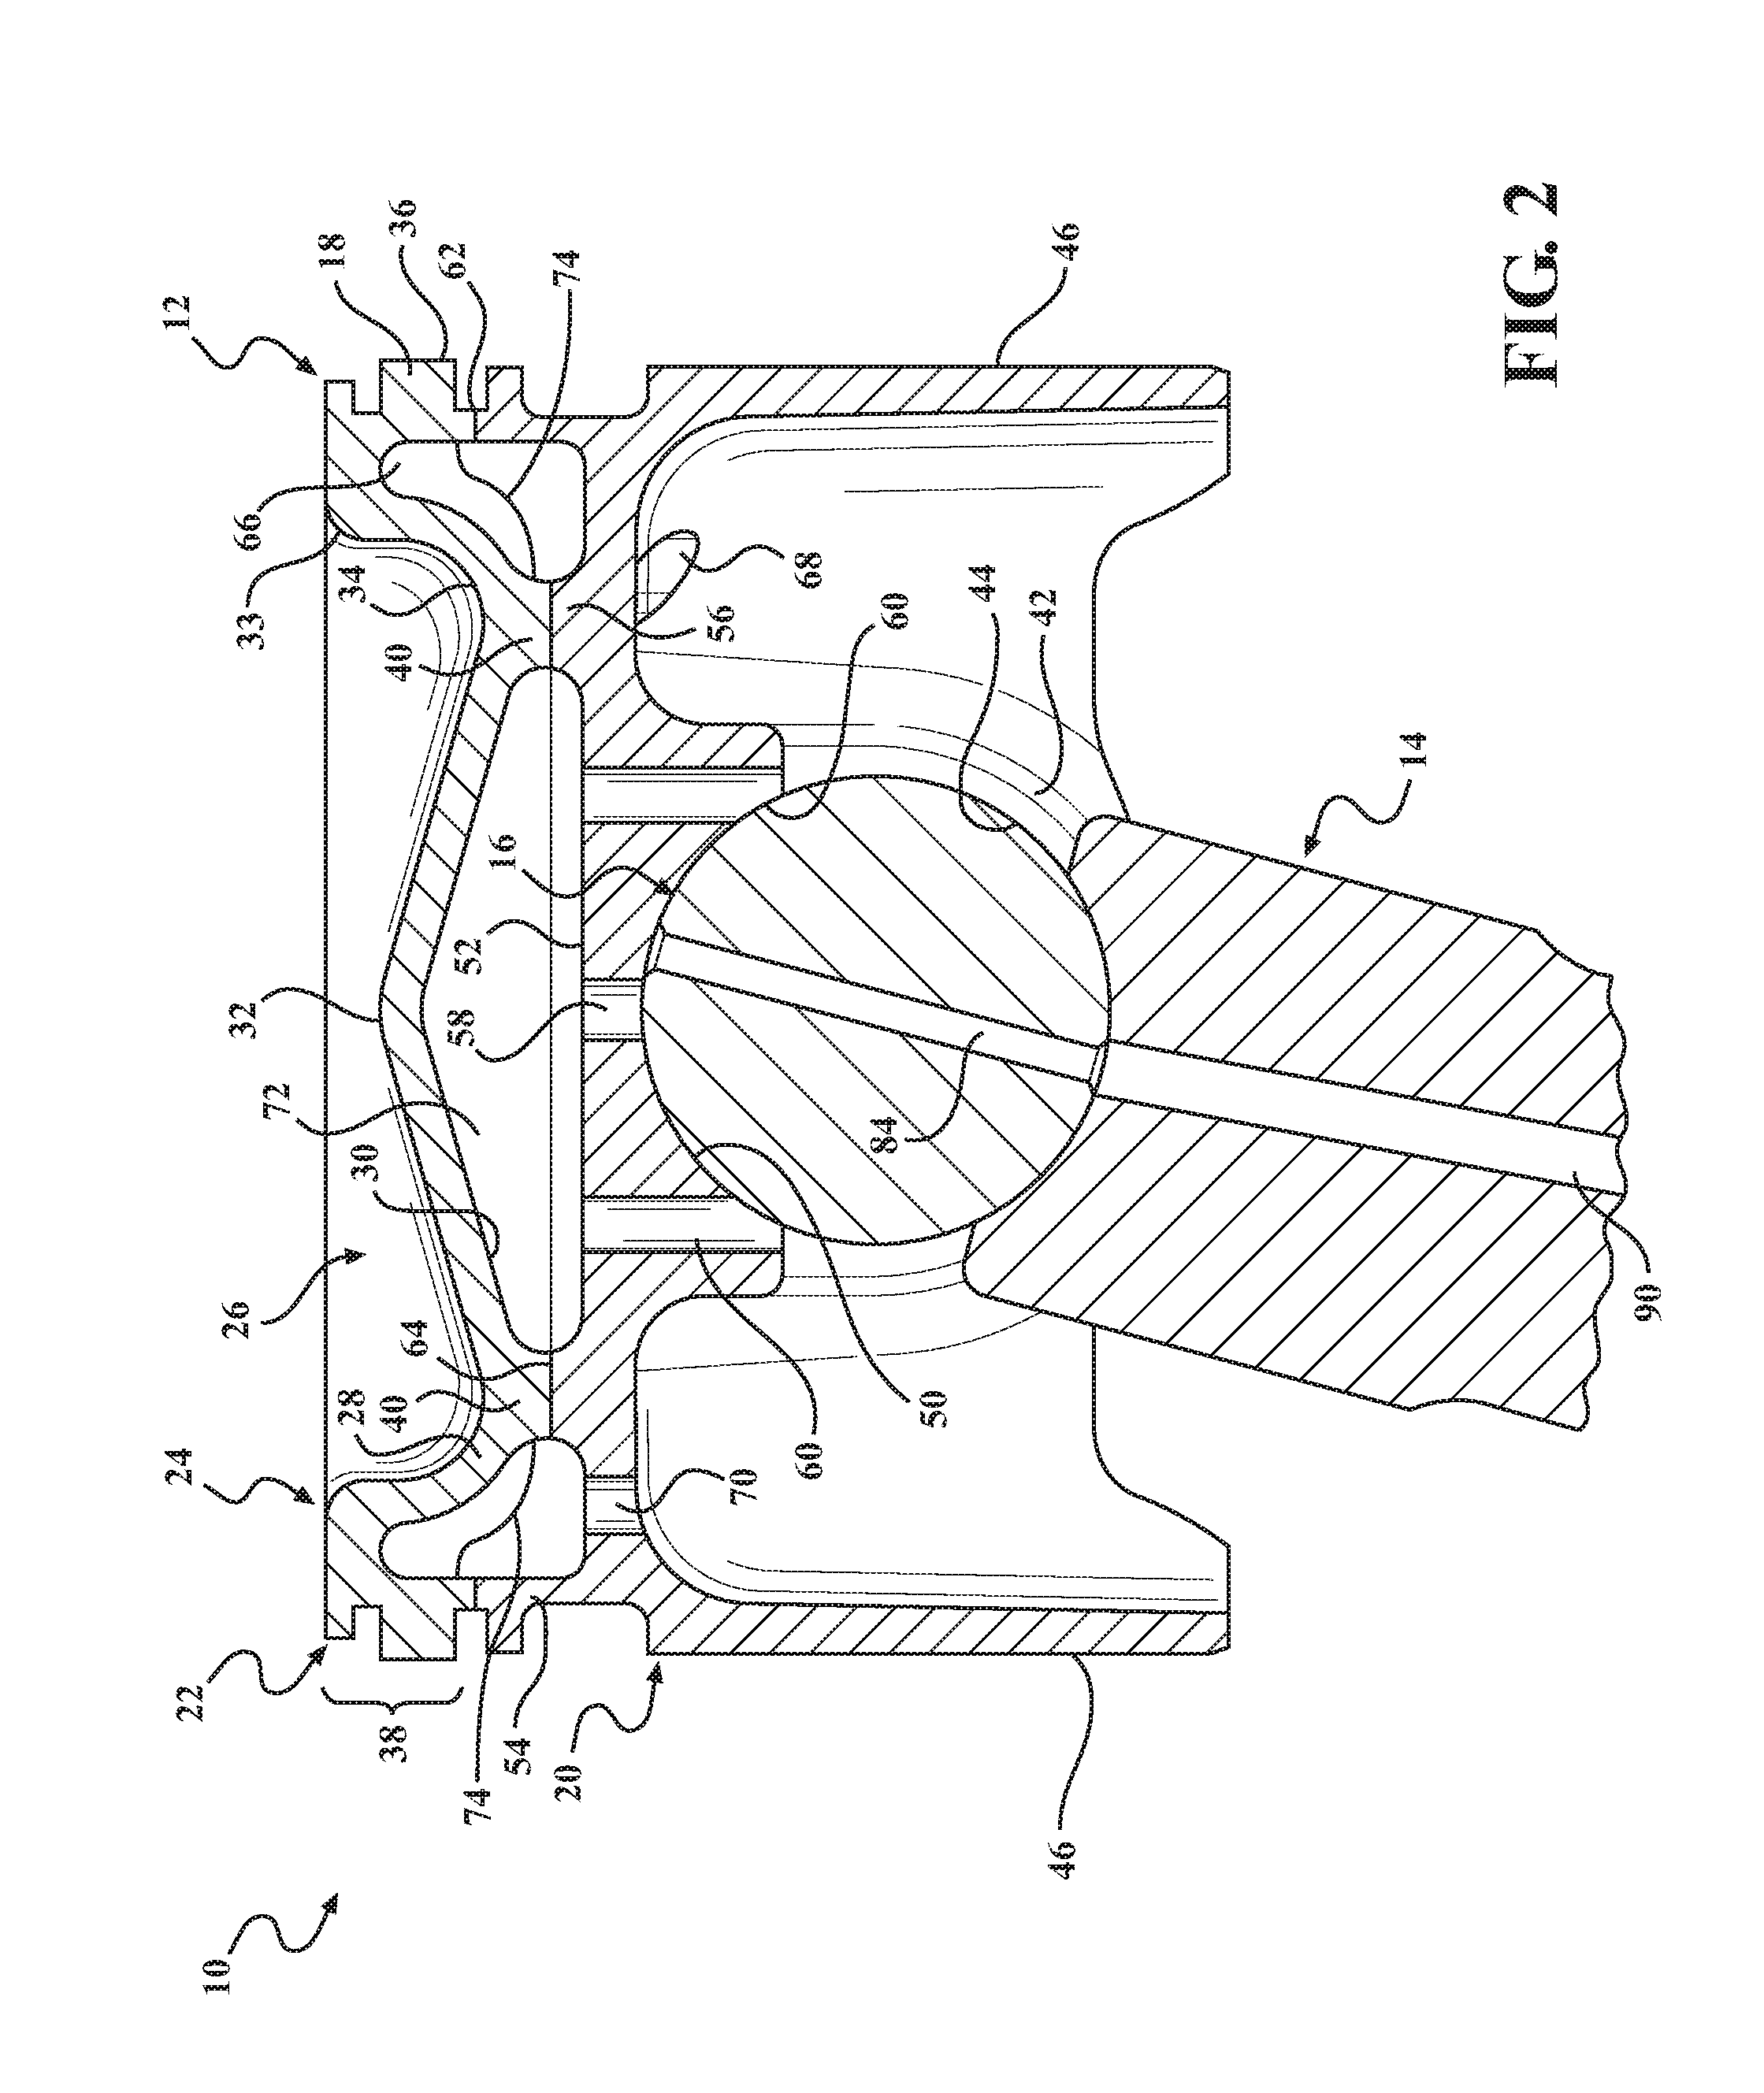 Reduced compression height dual gallery piston, piston assembly therewith and methods of construction thereof